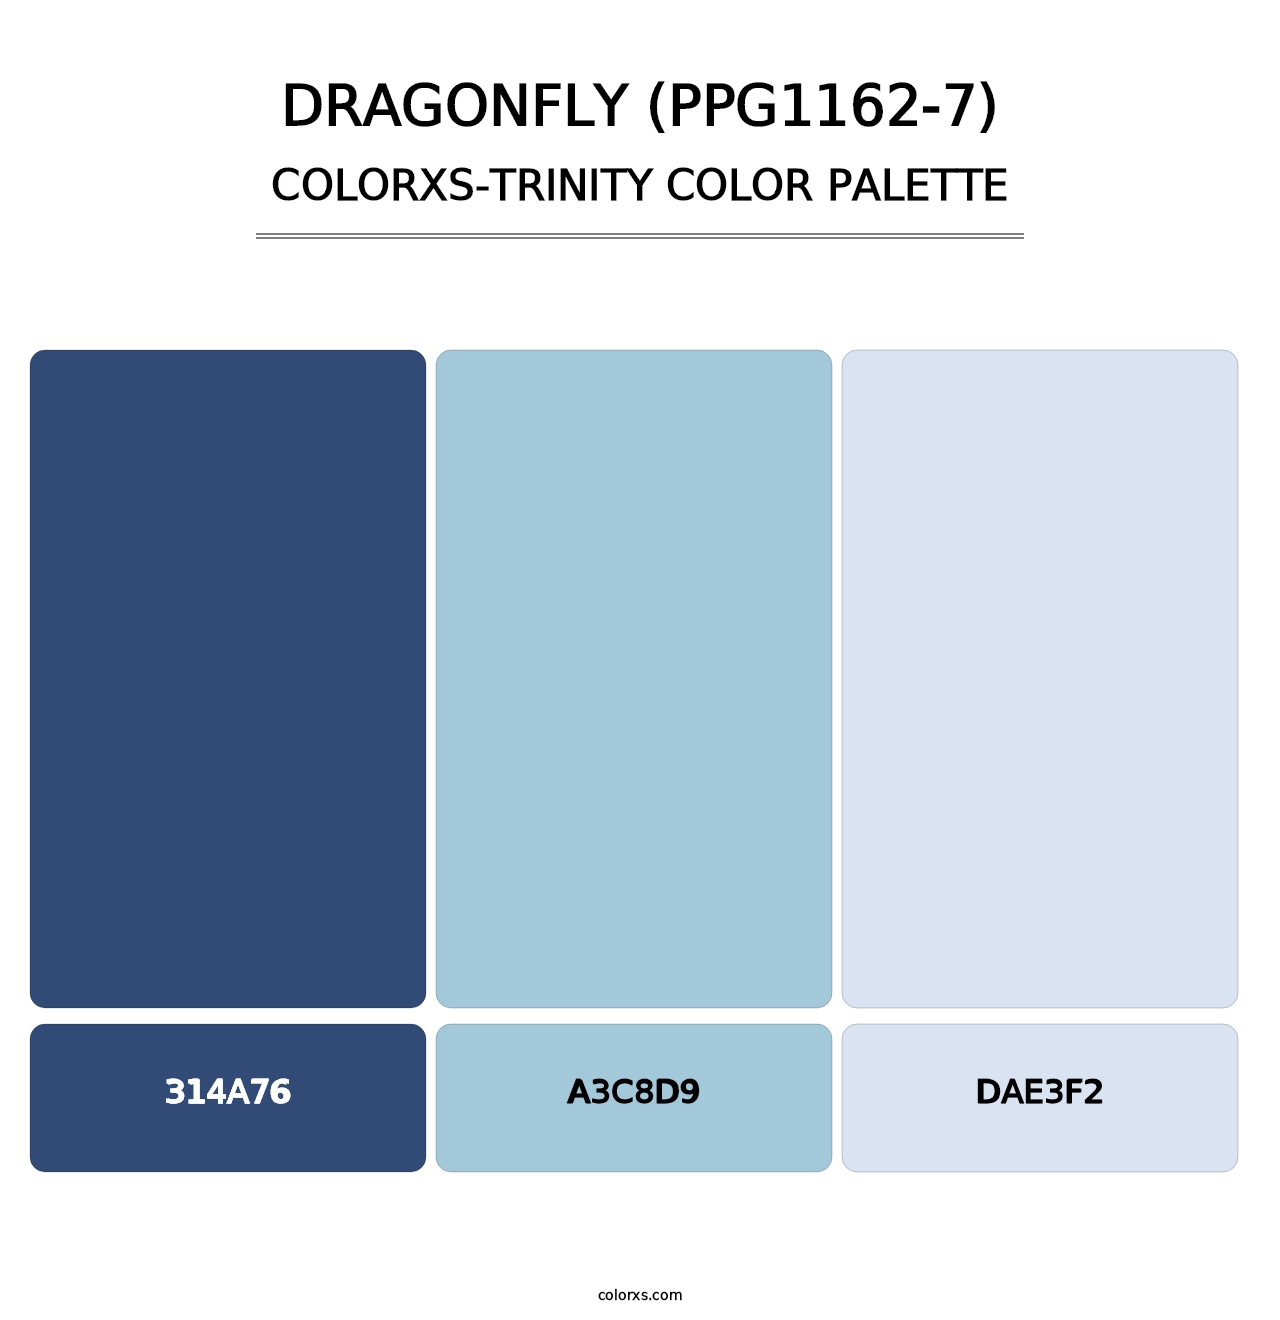 Dragonfly (PPG1162-7) - Colorxs Trinity Palette